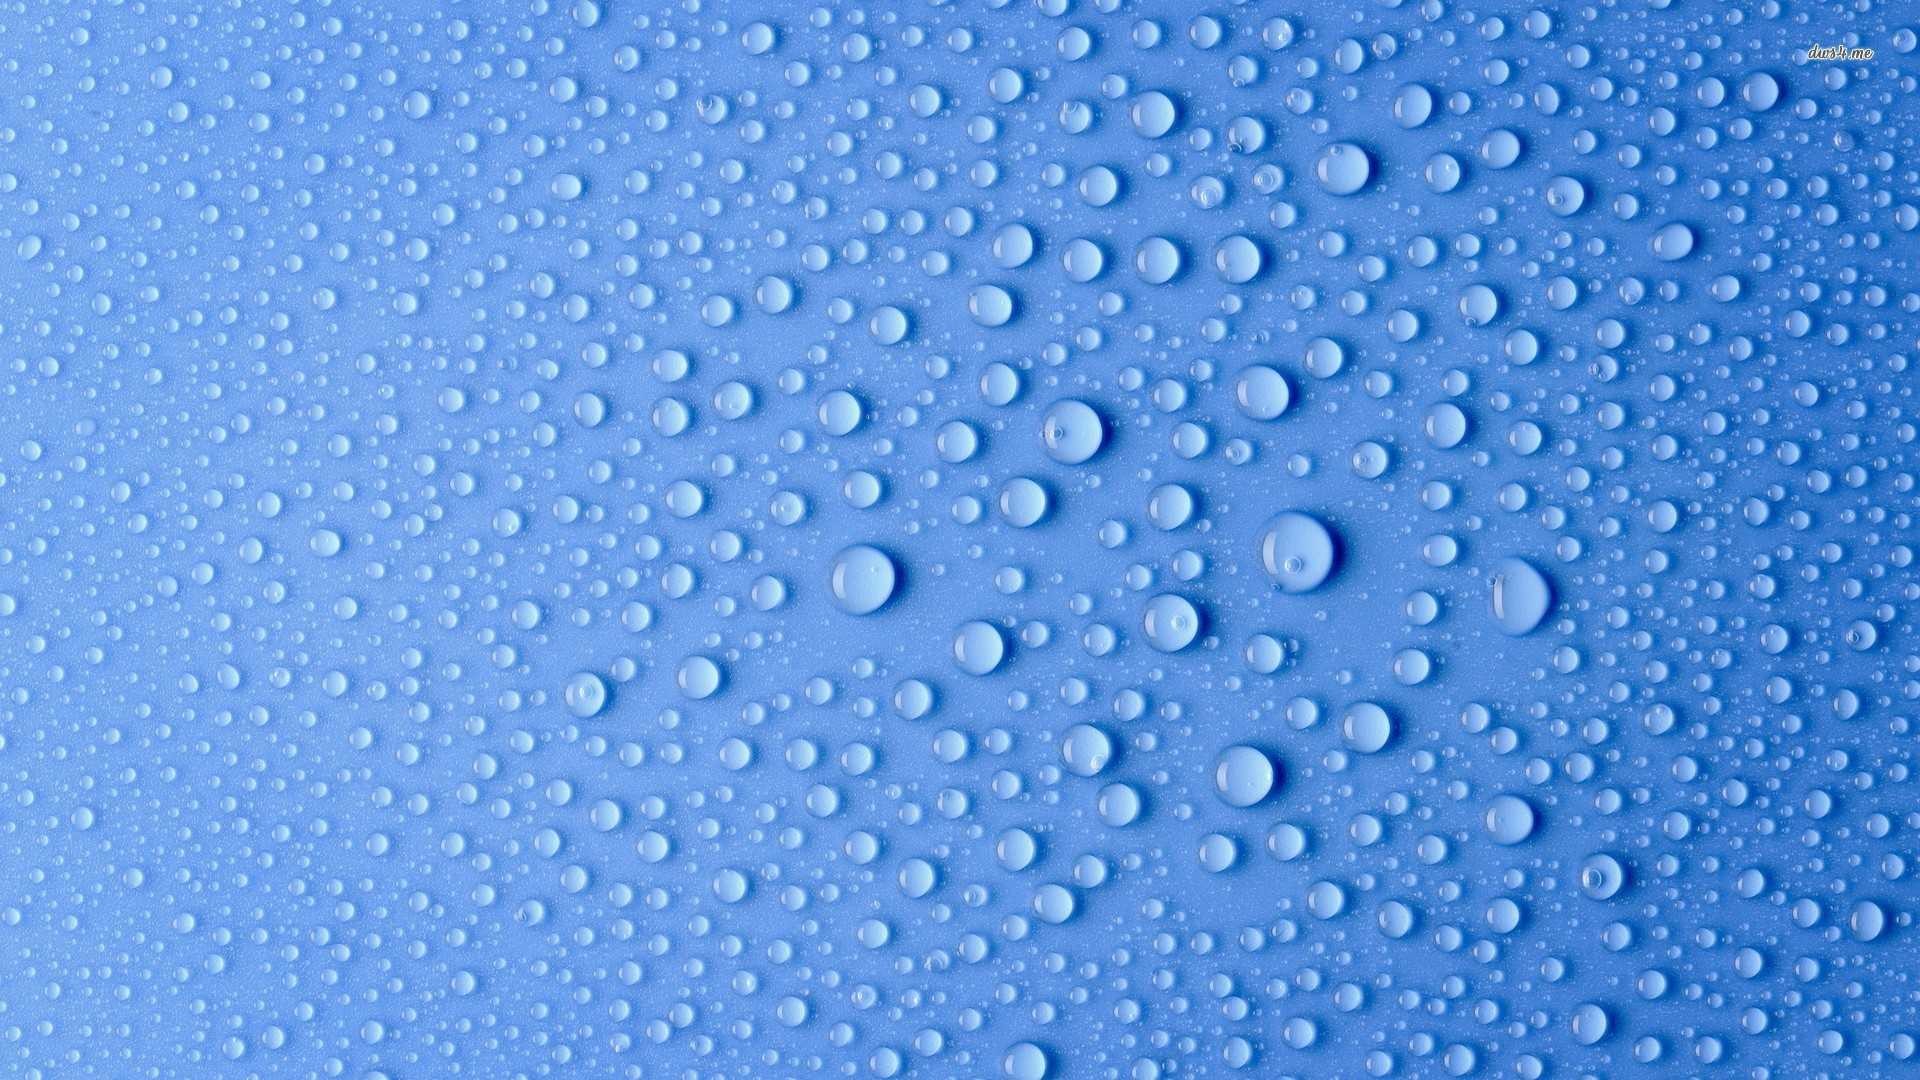 High Resolution Water Droplet Background - HD Wallpaper 